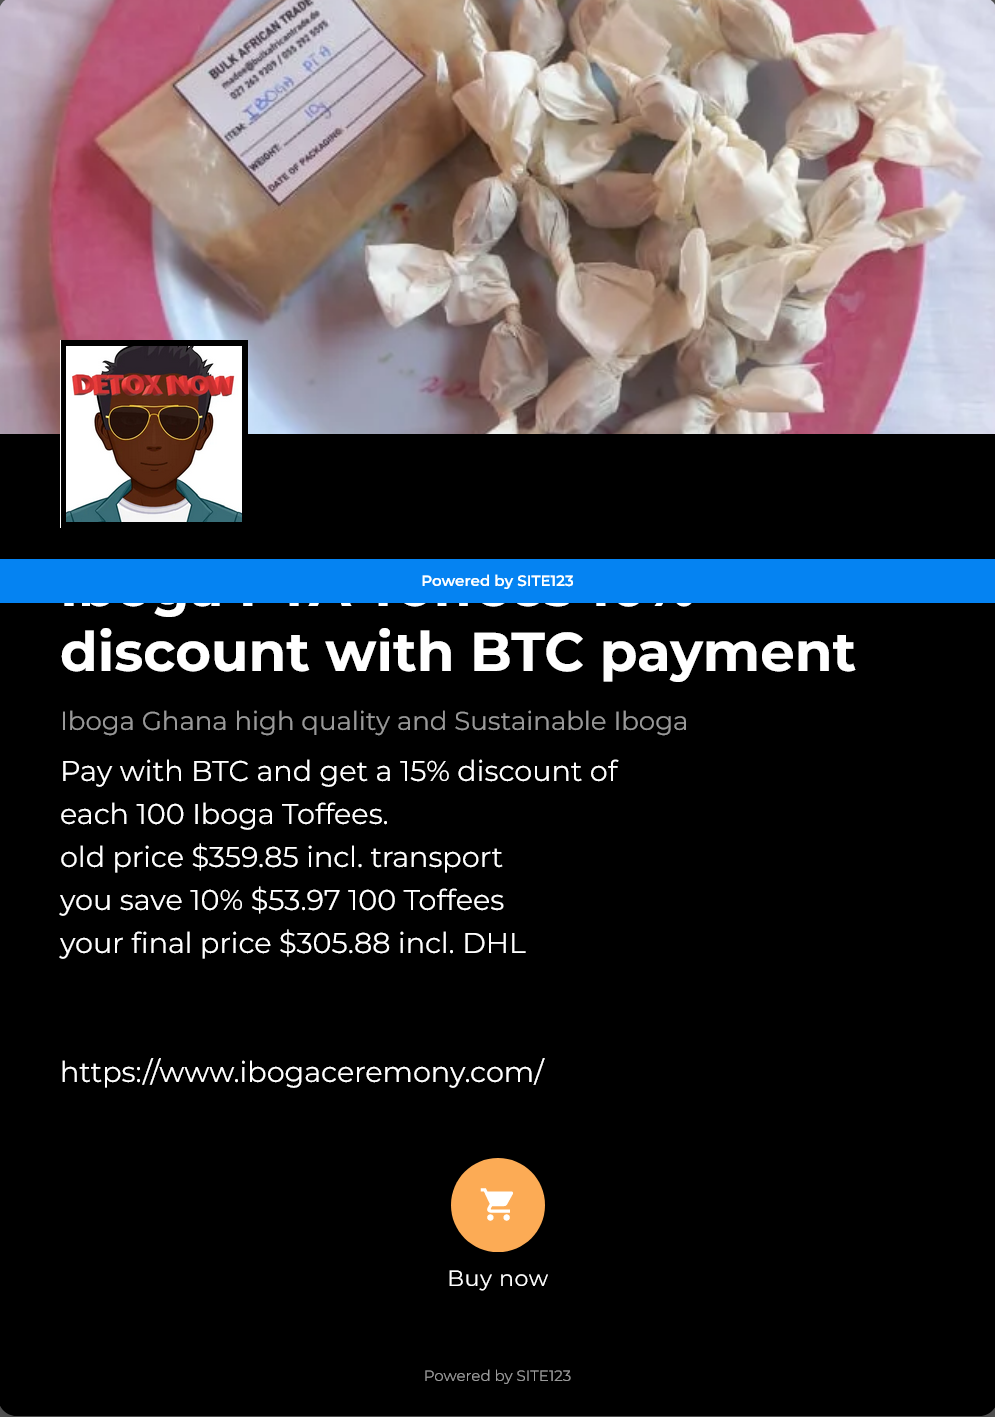 Iboga PTA Toffees 10% discount with BTC payment